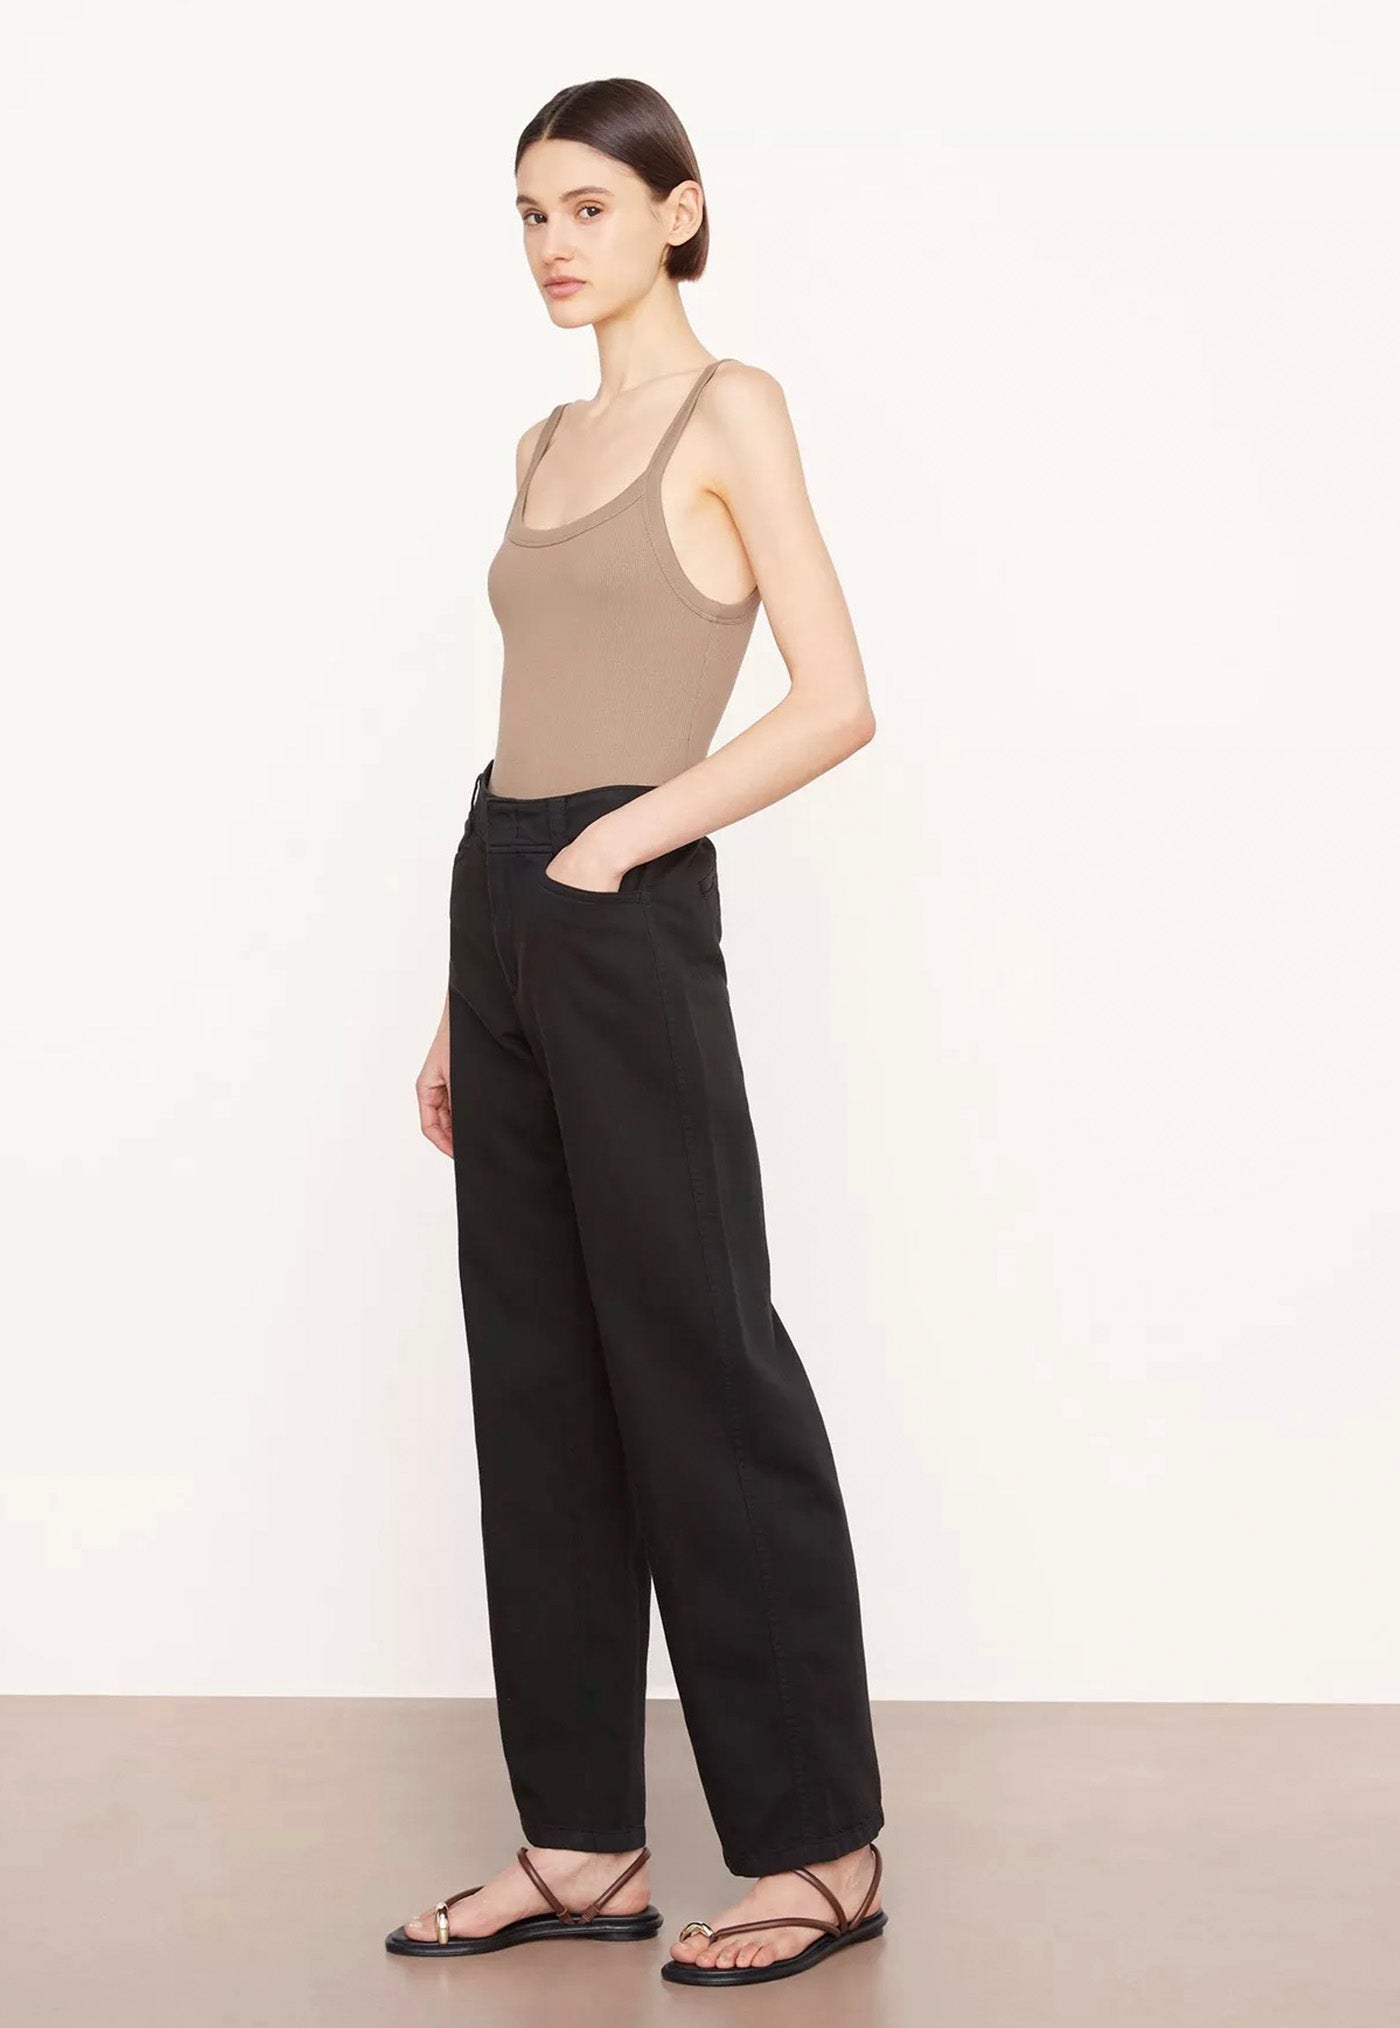 High Waist Casual Pant - Black sold by Angel Divine